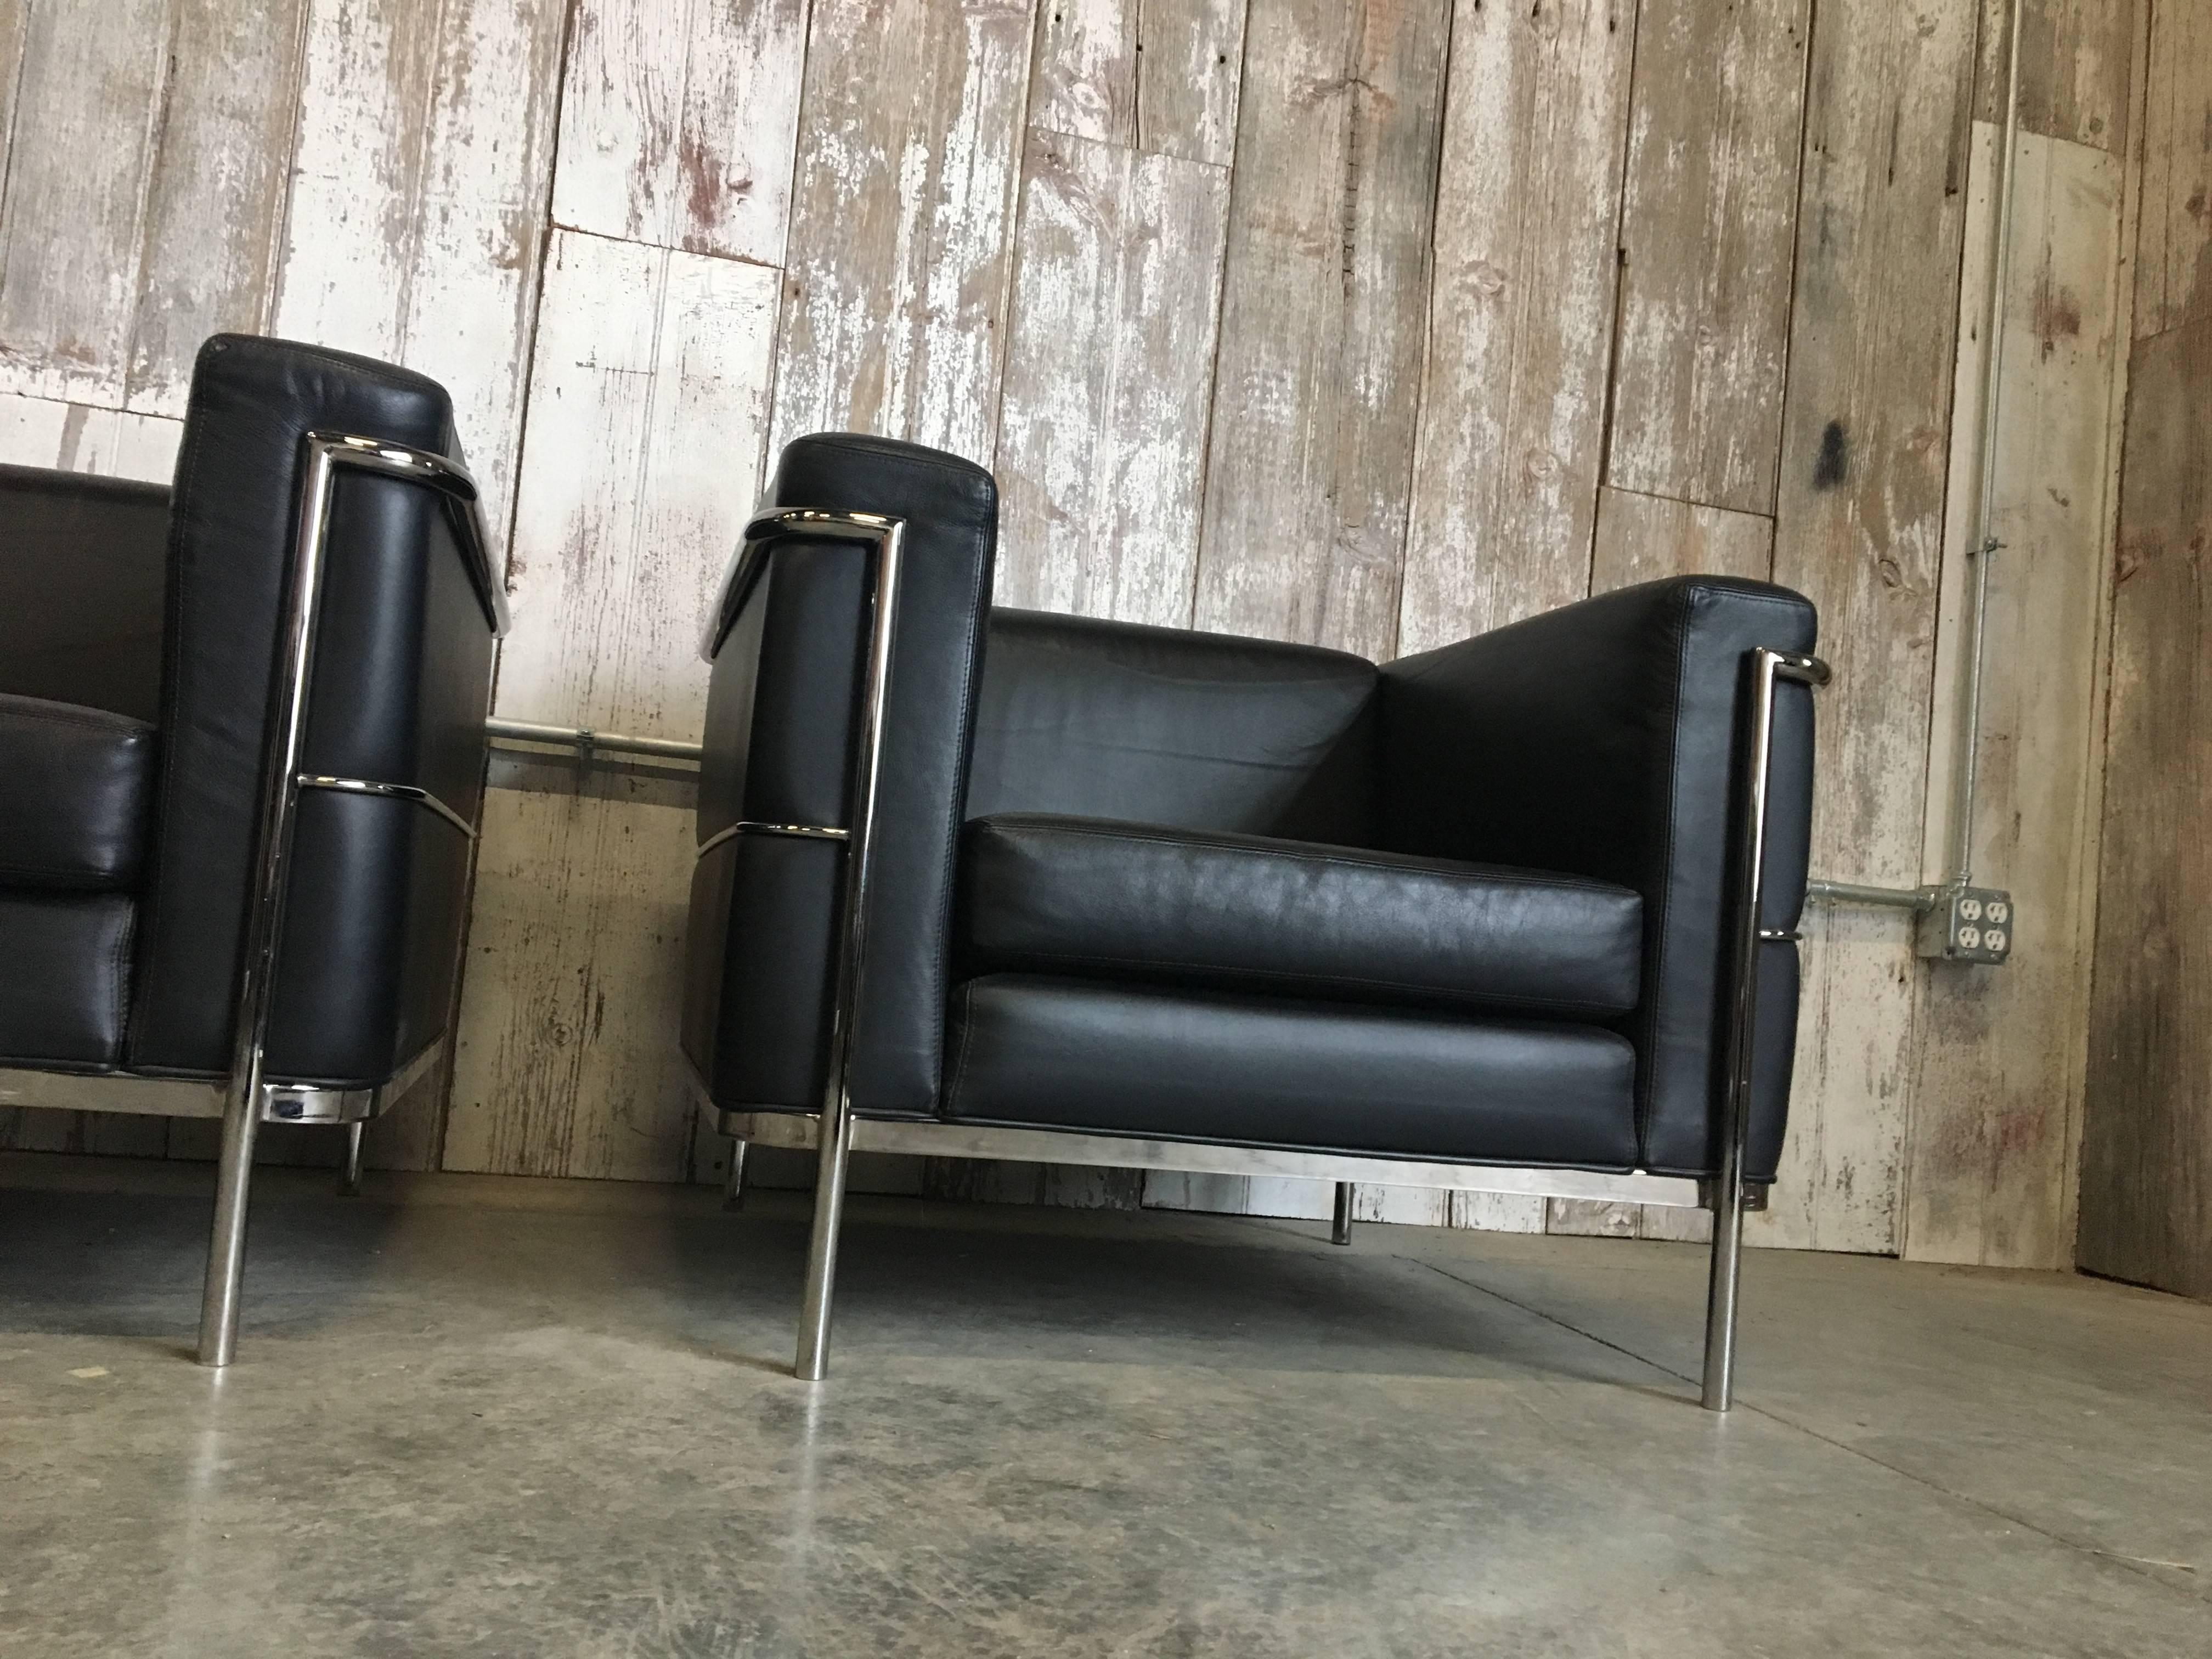 Pair of Lounge Chairs by Jack Cartwright In Black Leather 1